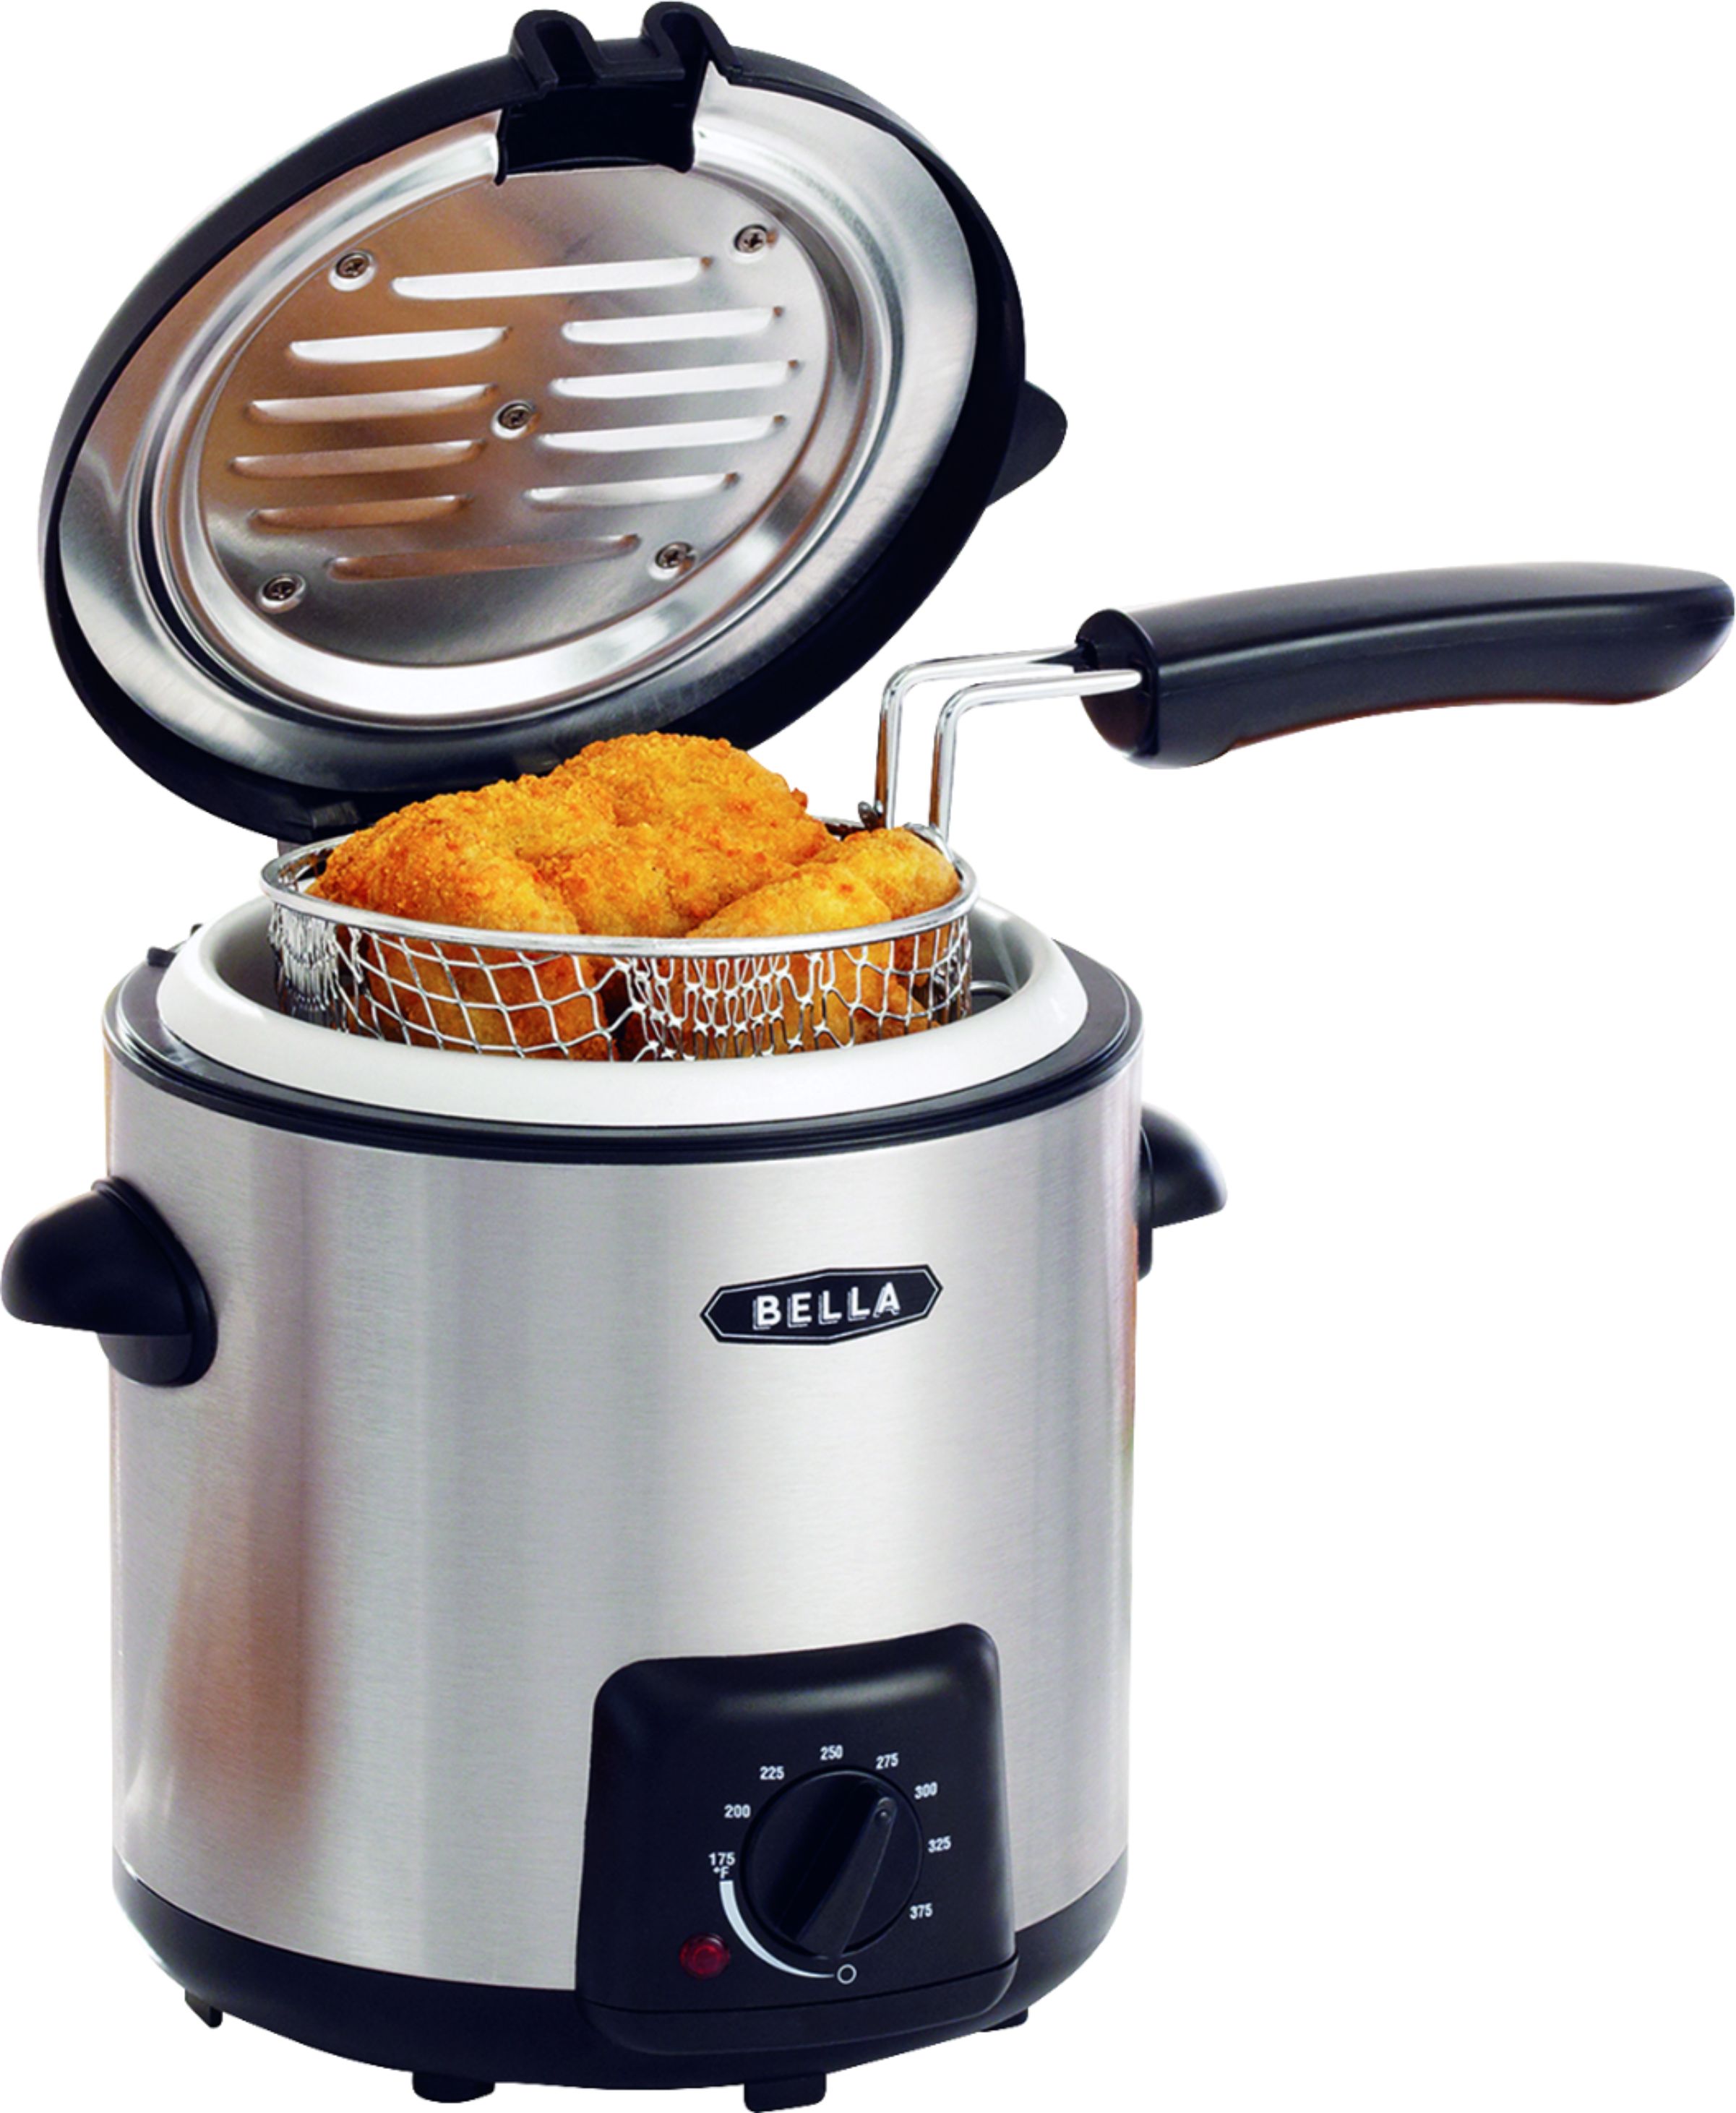 Angle View: Bella - 0.9L Deep Fryer - Stainless Steel